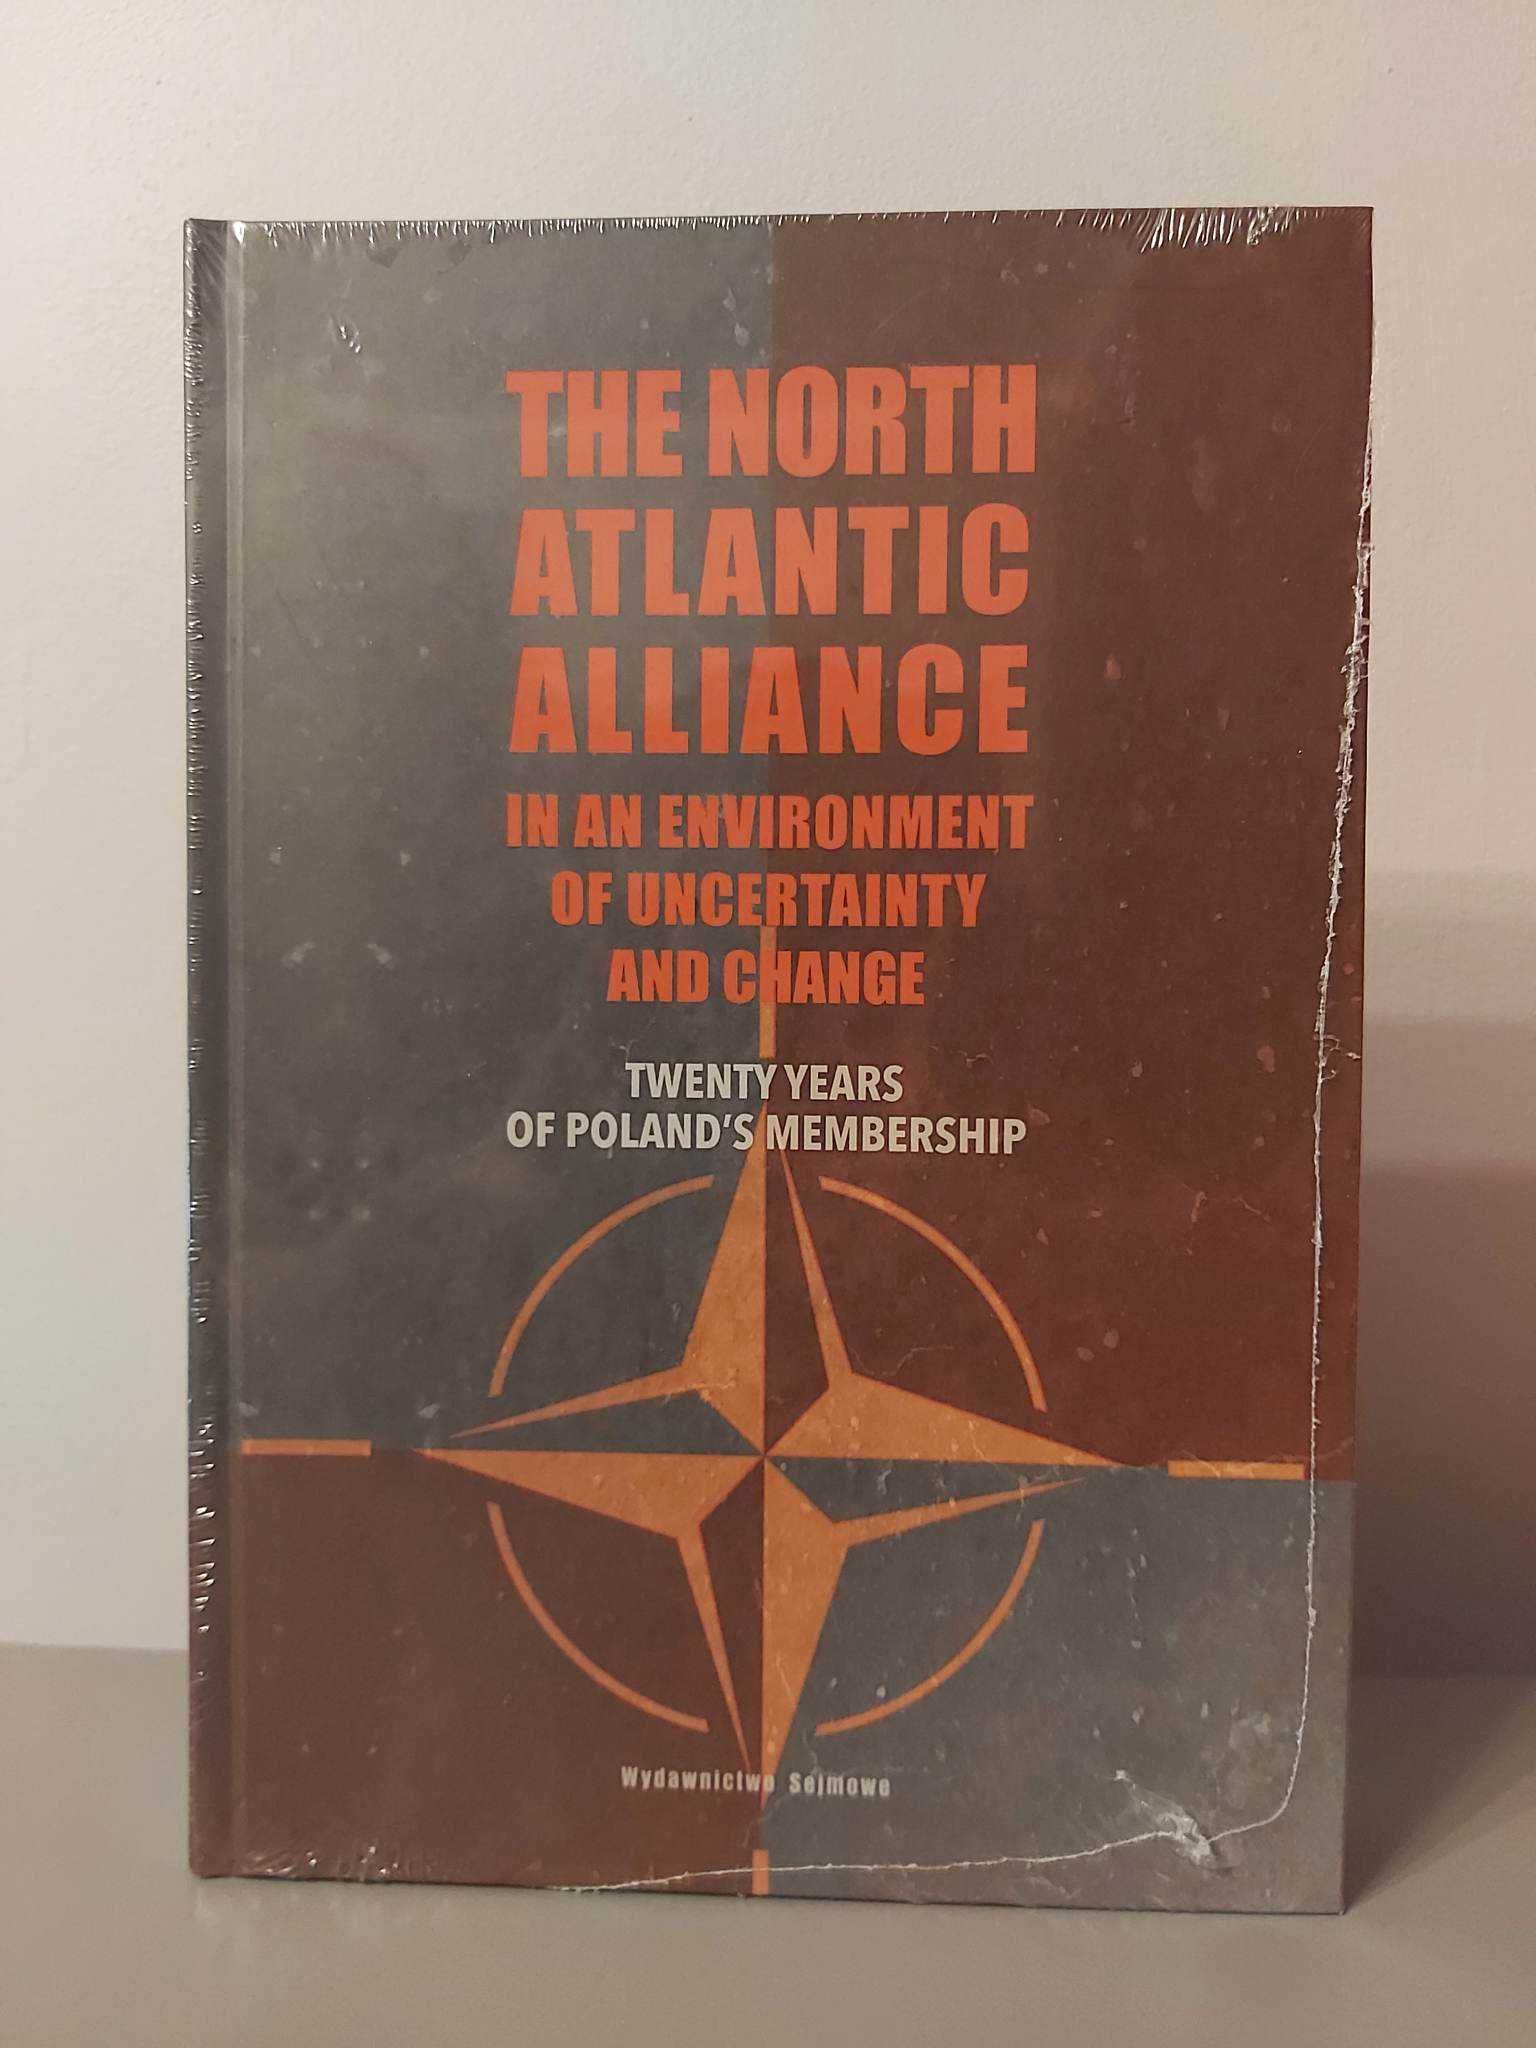 The North Atlantic Alliance in an Environment of Uncertainty andChange